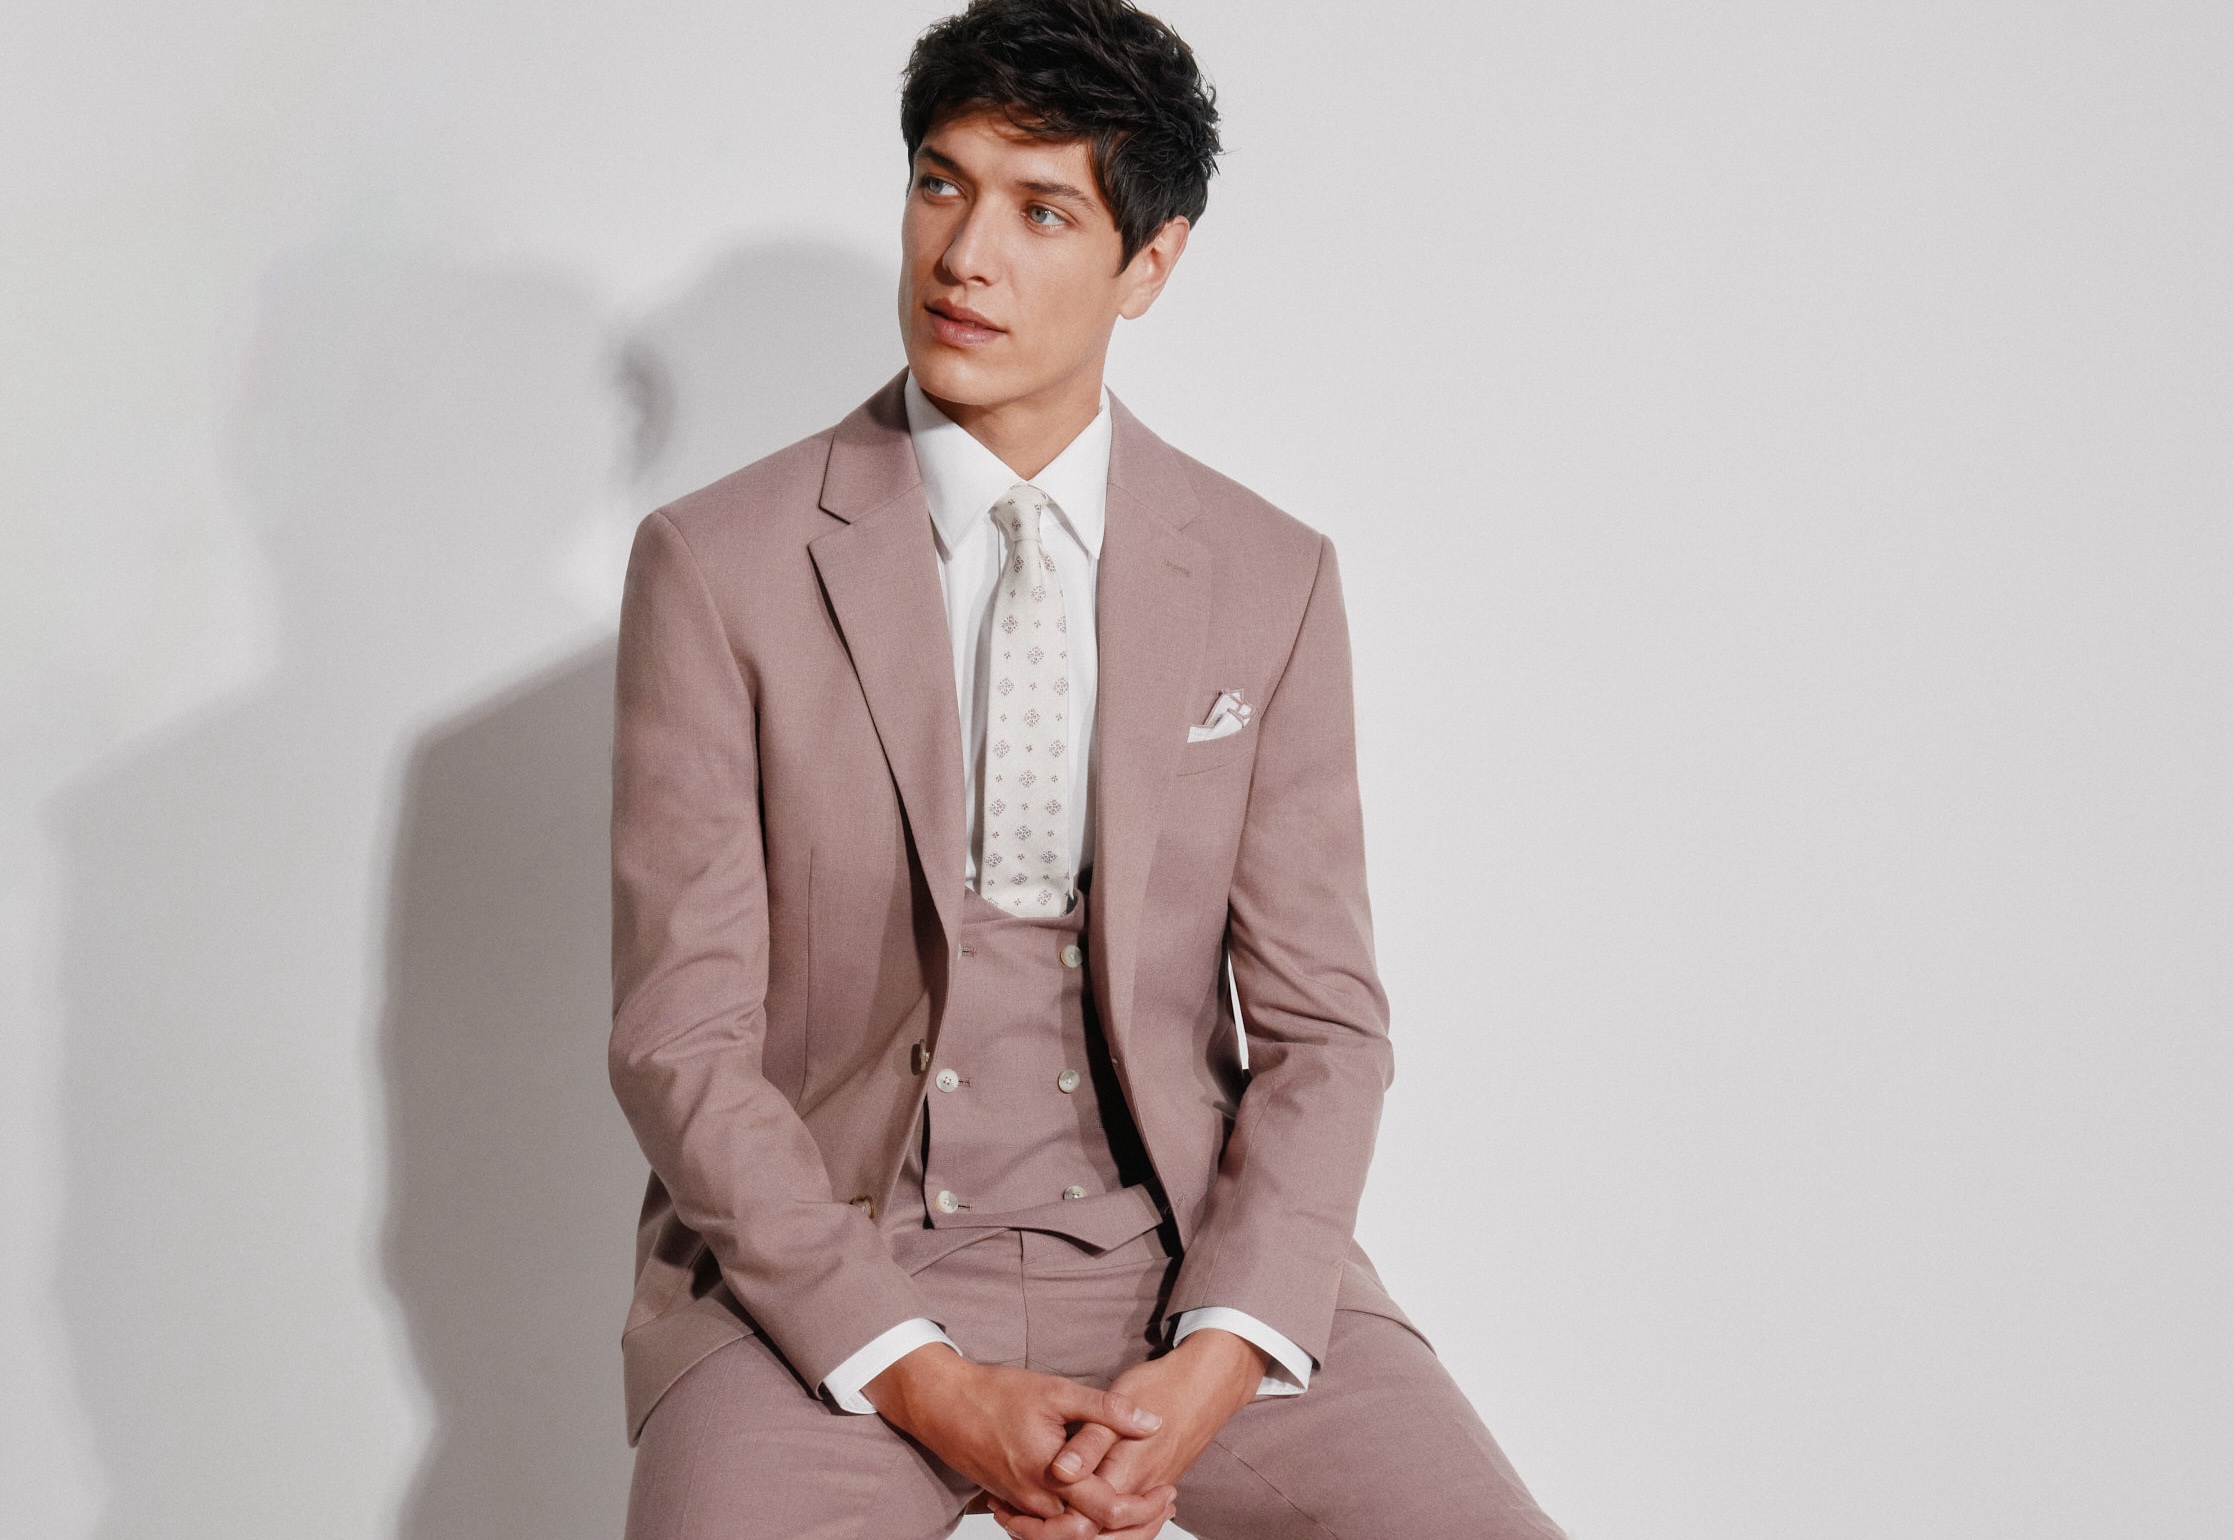 Wedding suiting from Moss Bros